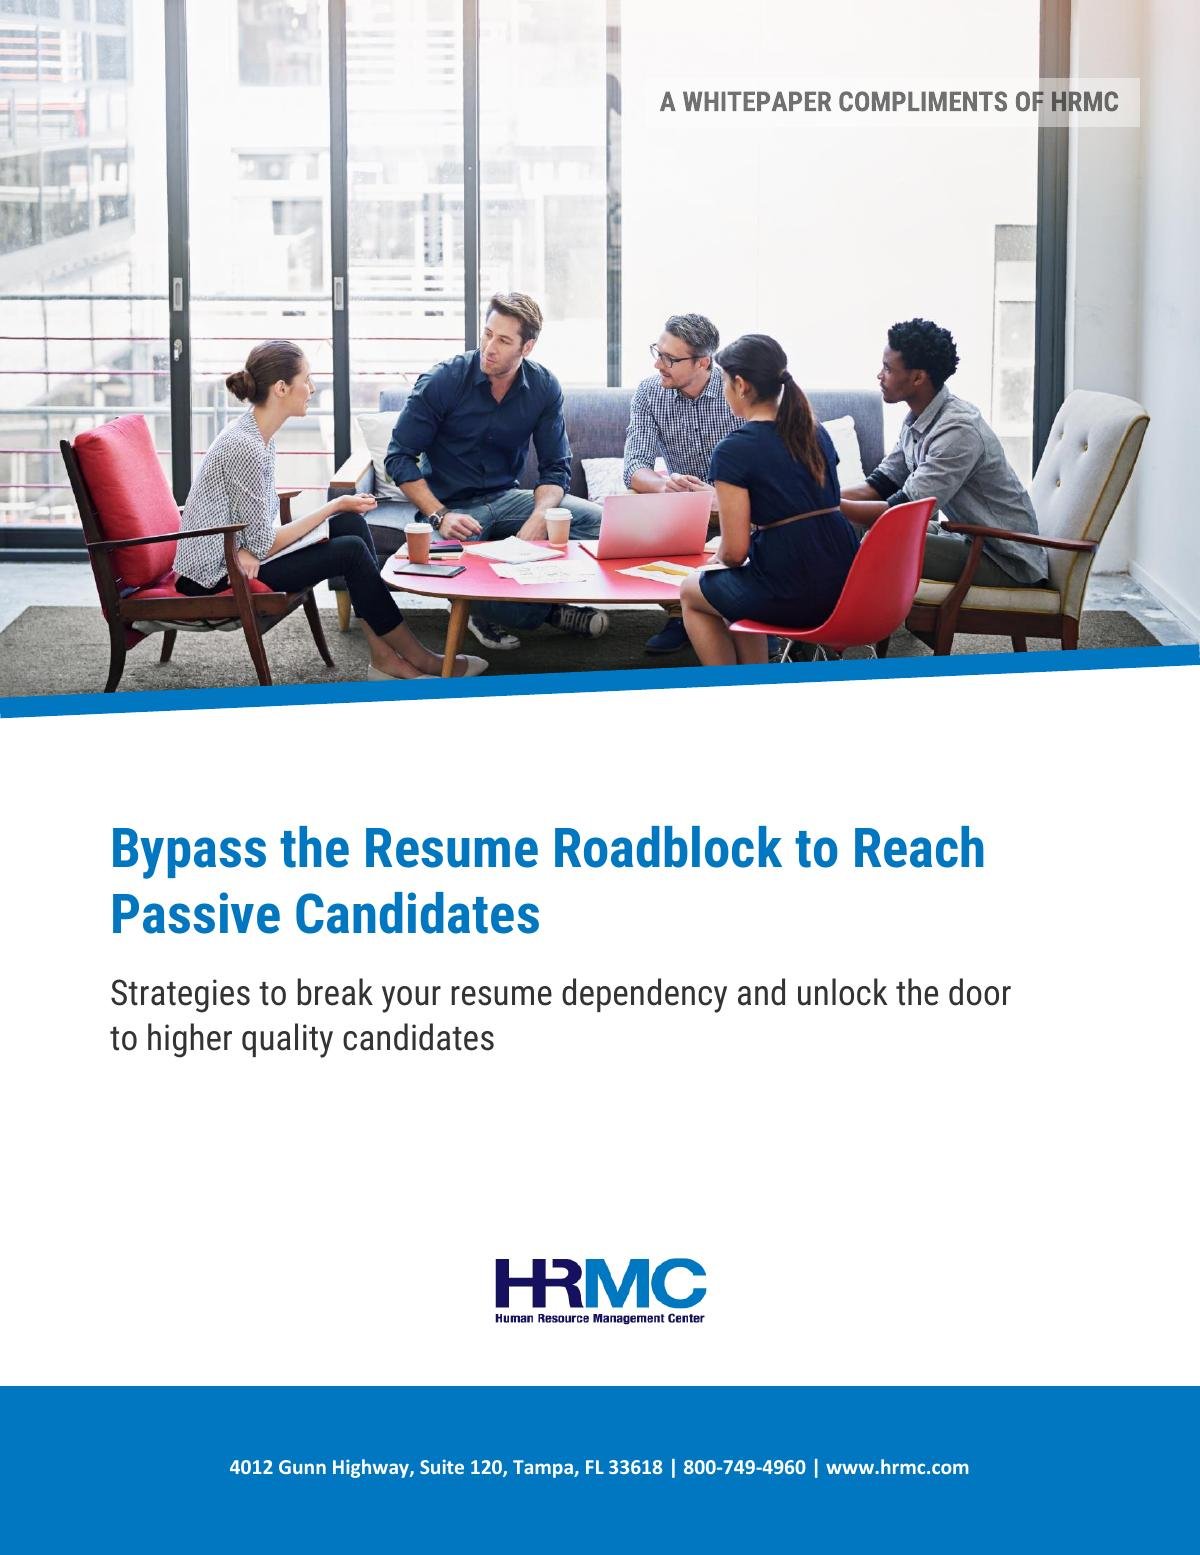 Bypass the Resume Roadblock to Reach Passive Candidates